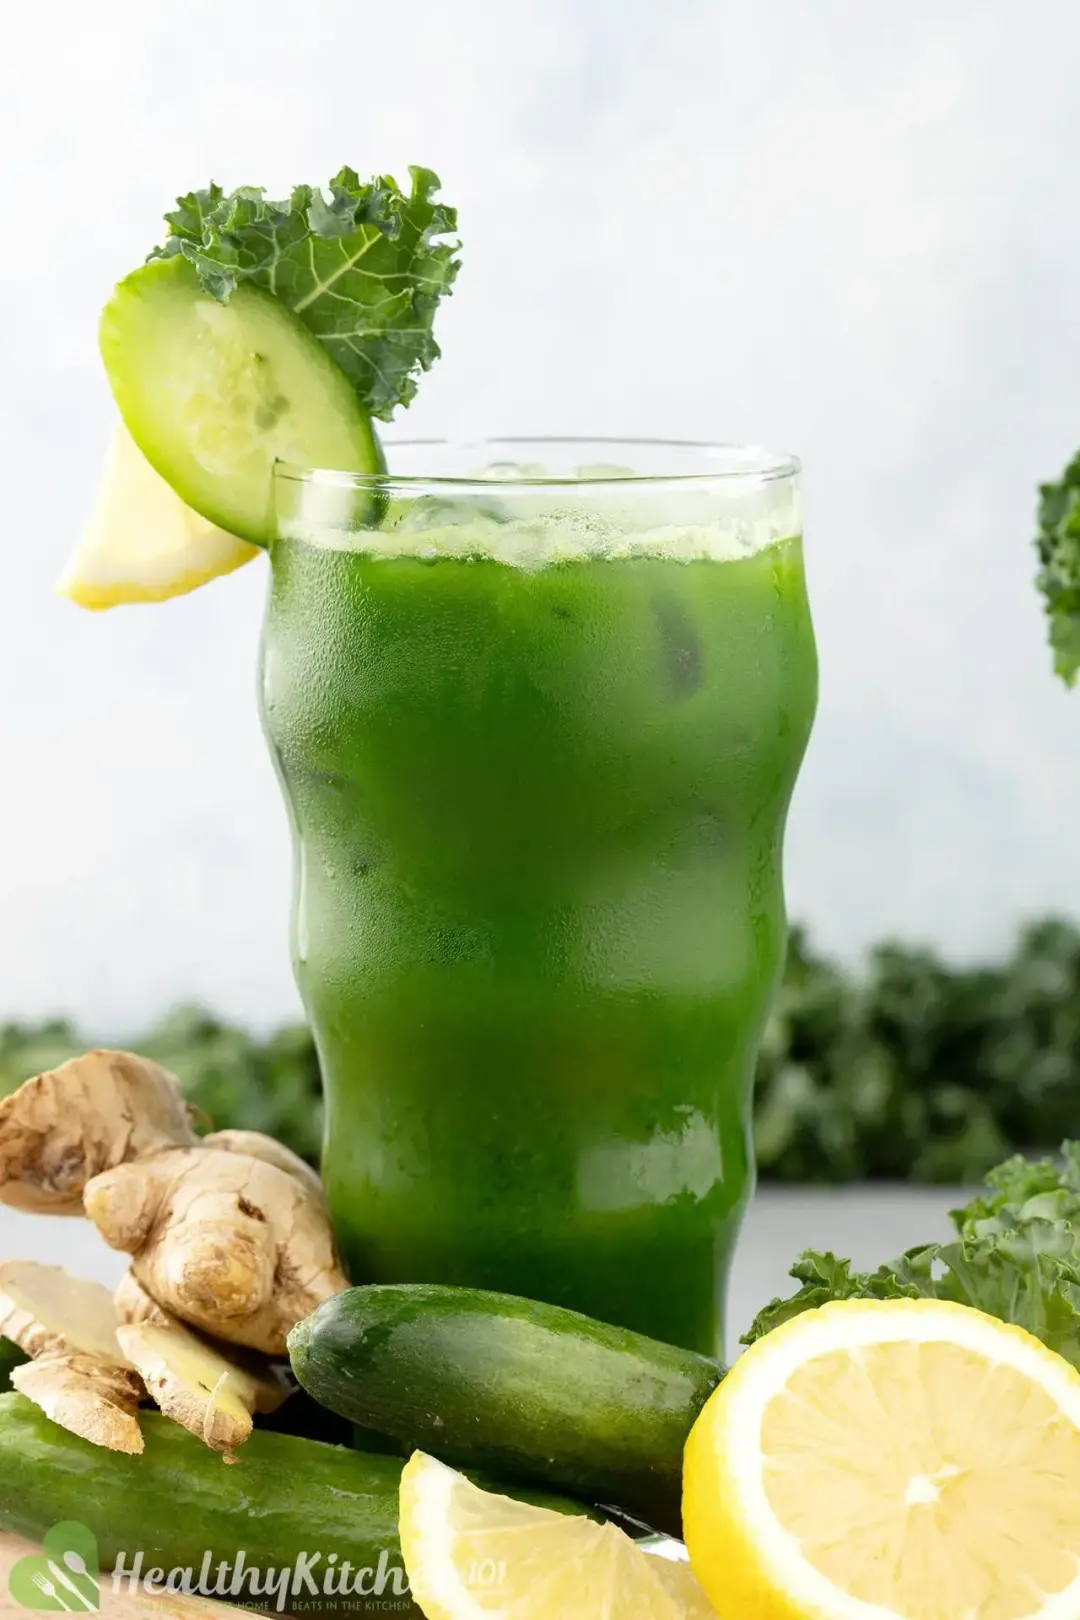 An iced glass of kale juice, garnished with cucumber slice, lemons, whole cucumbers, and a ginger knob